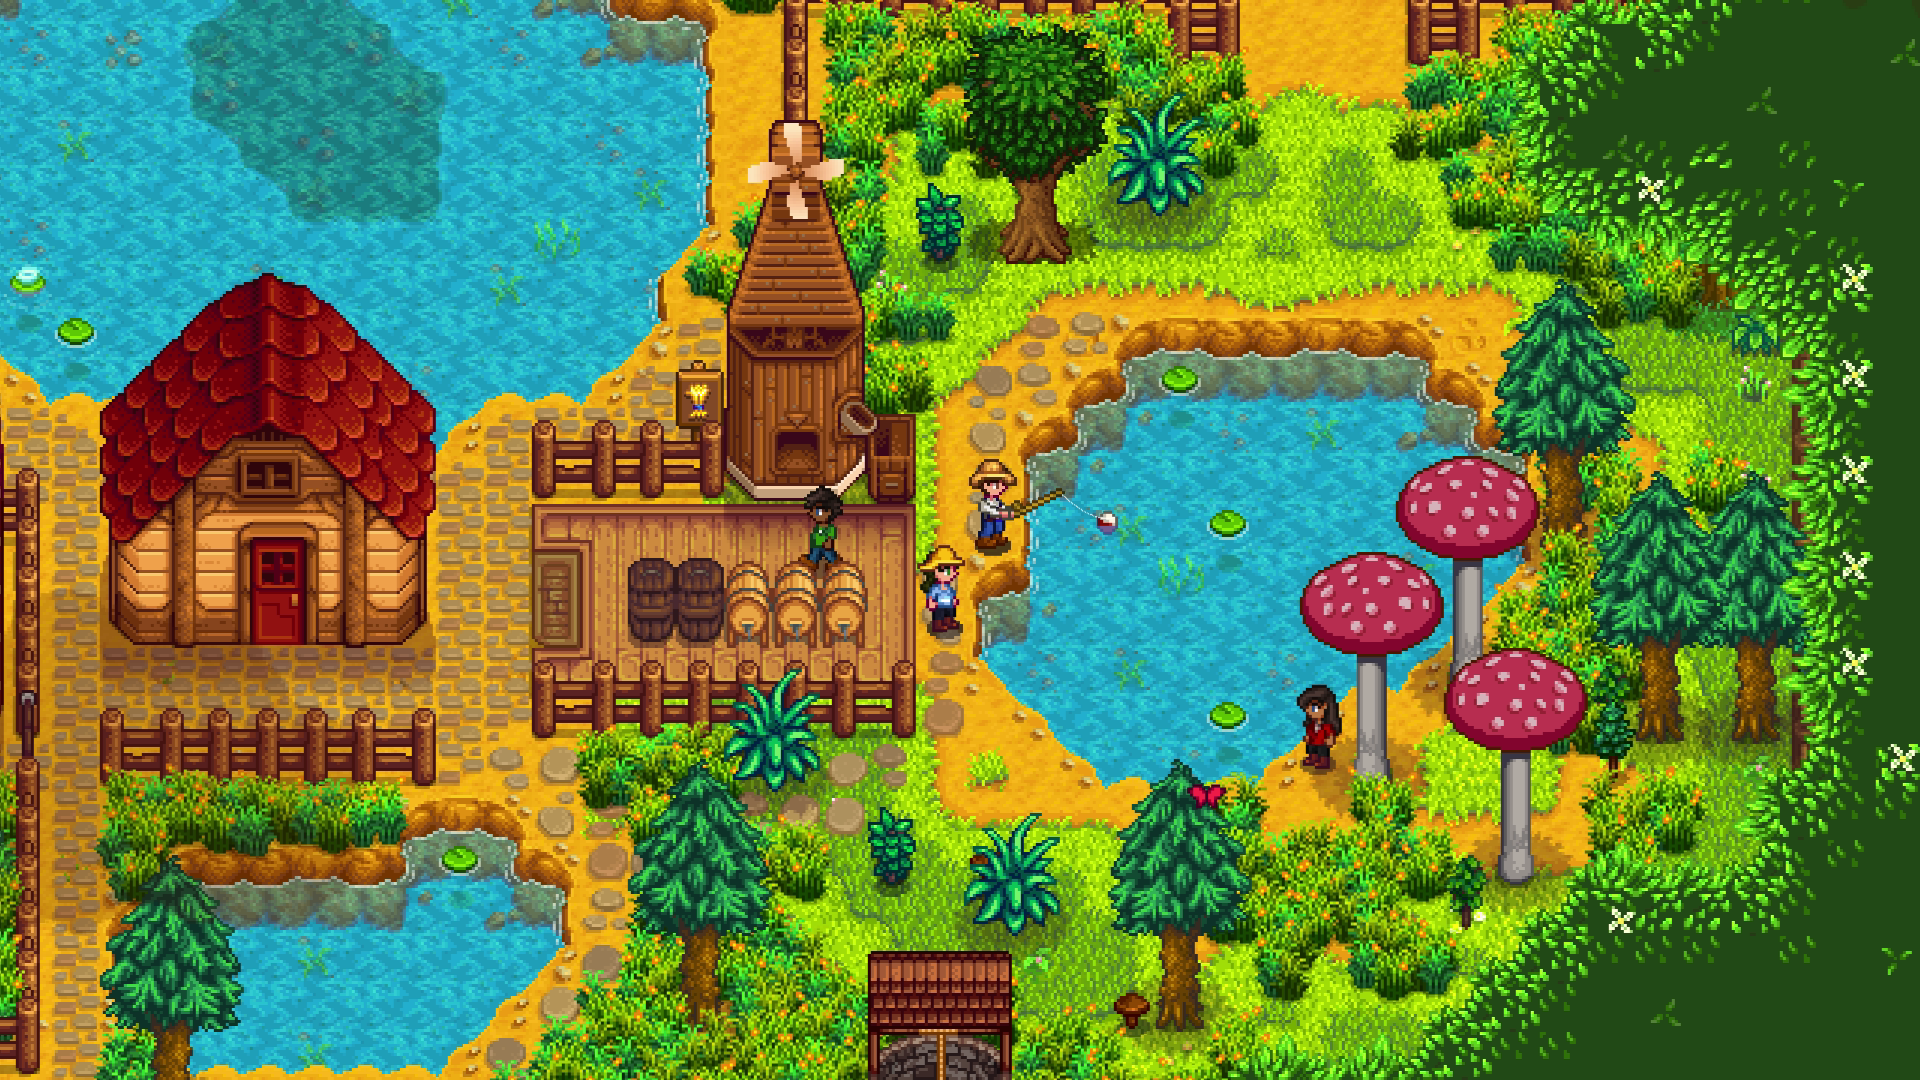 Stardew Valley allows you to catch dozens of varieties of fish at specific times and locations. Credit: ConcernedApe